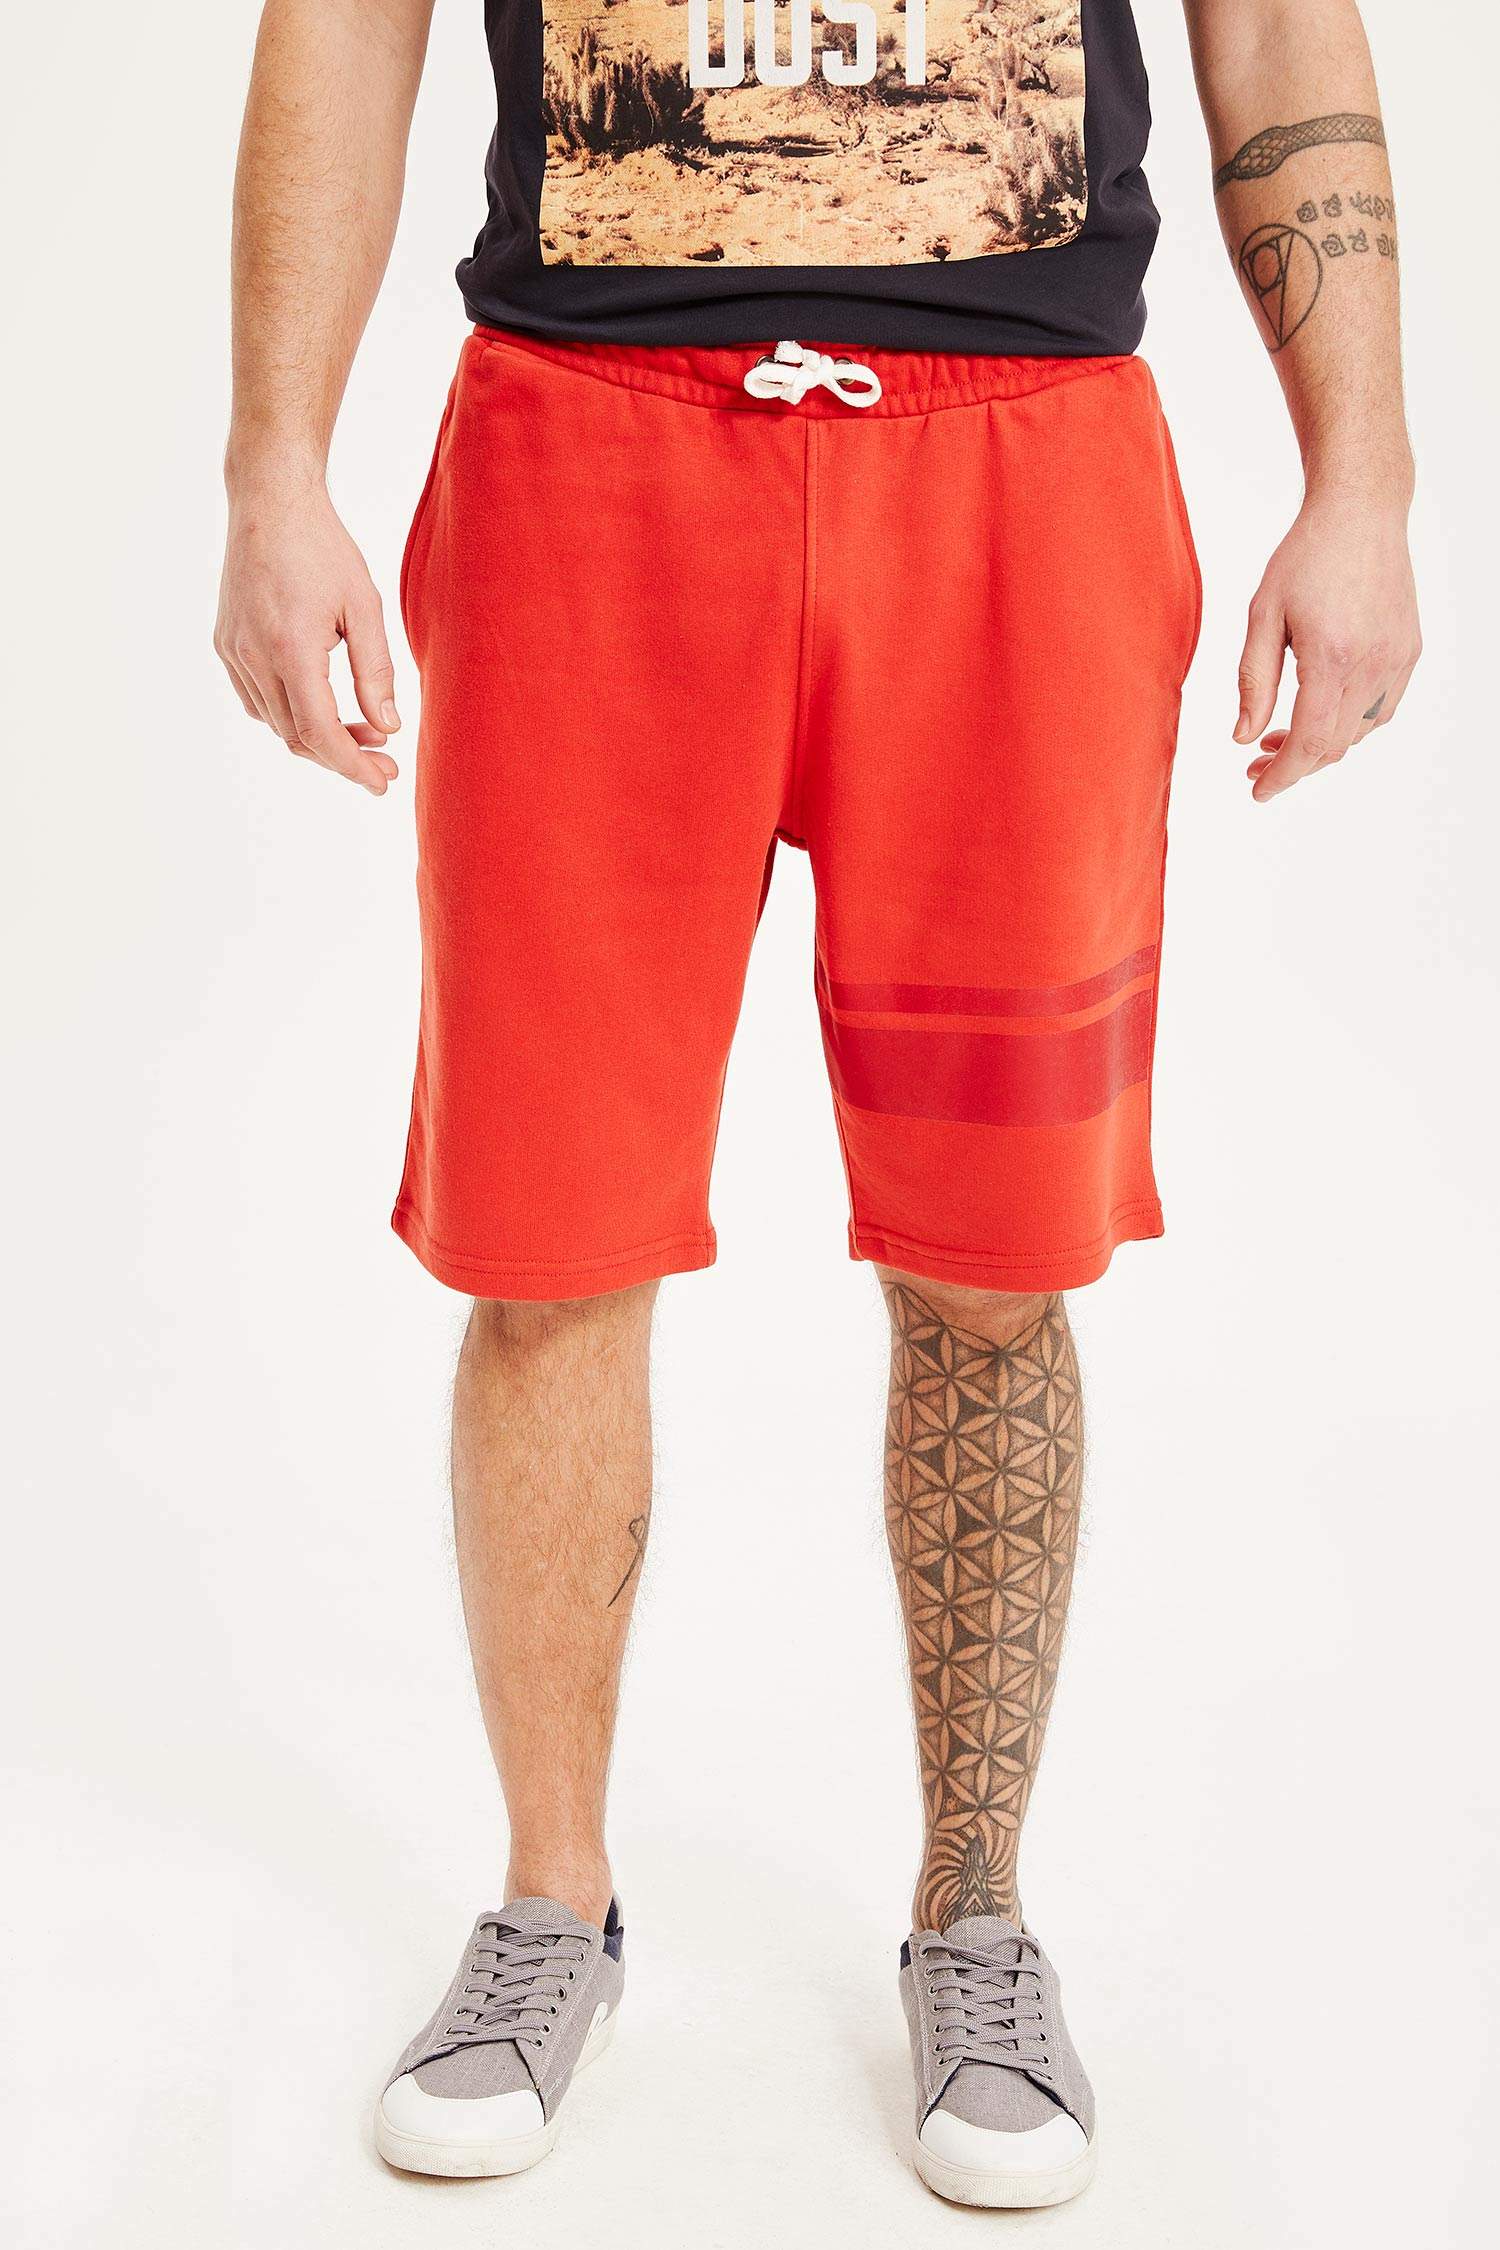 Defacto Man Knitted Short. 2